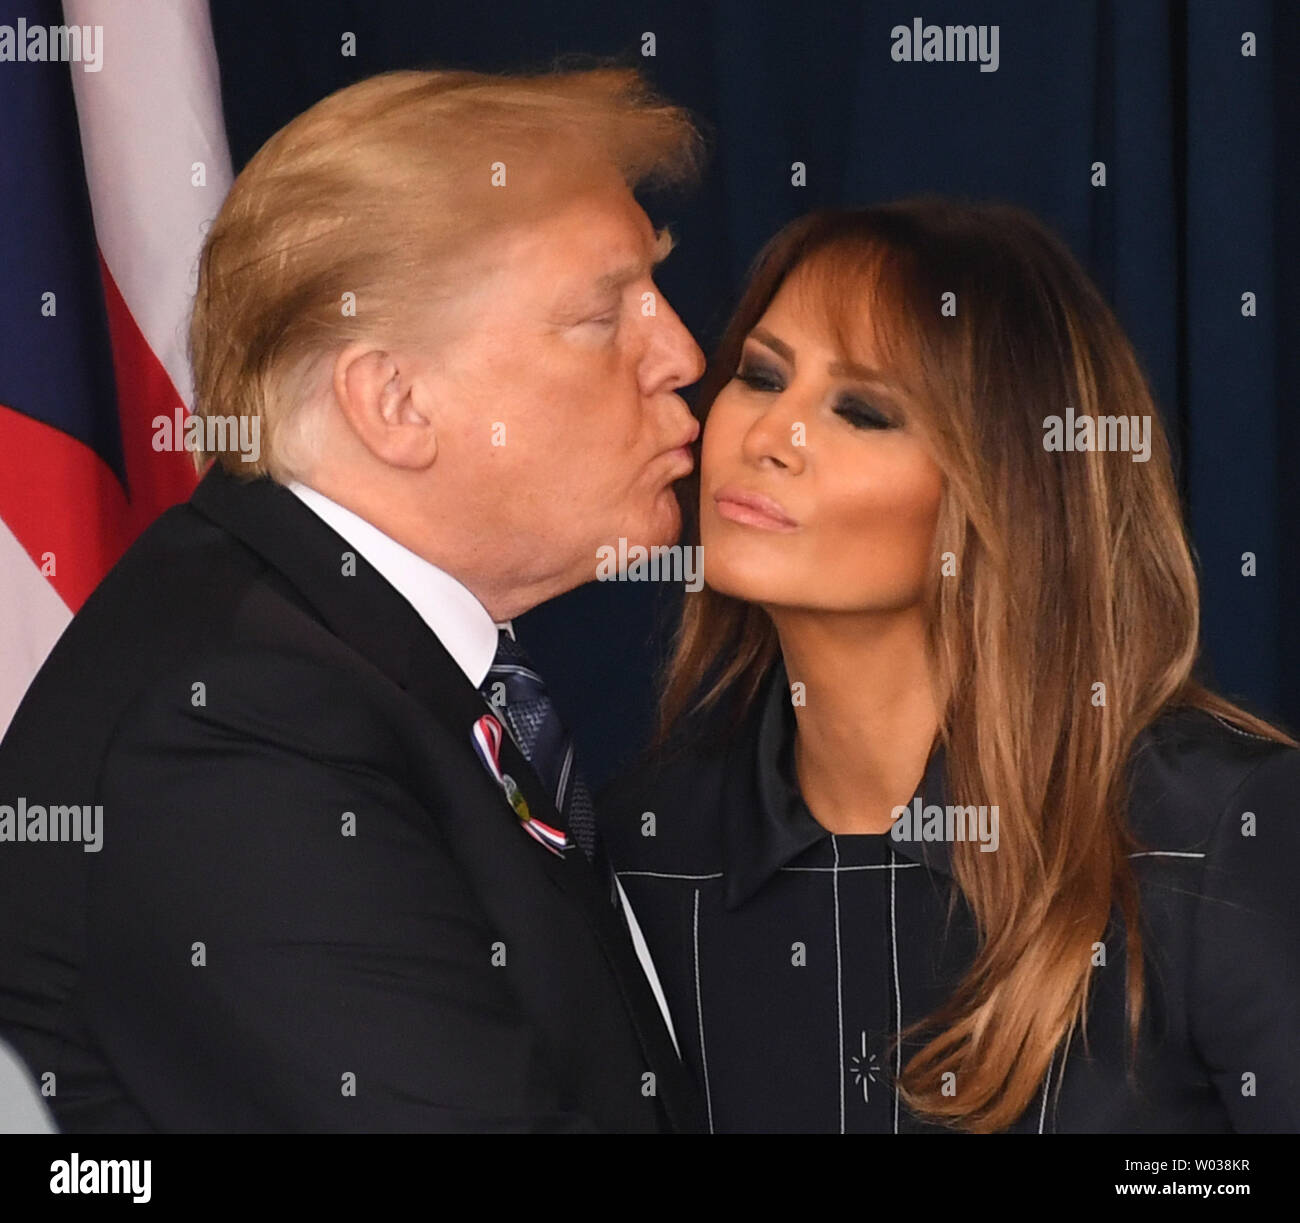 President Donald Trump kisses First Lady Melania Trump following a ceremony marking the anniversary of 9/11 at the Flight 93 National Memorial in Shanksville, Pennsylvania on Tuesday, September 11, 2018. Flight 93 crashed during the September 11, 2001 terrorist attacks. Photo by Pat Benic/UPI Stock Photo